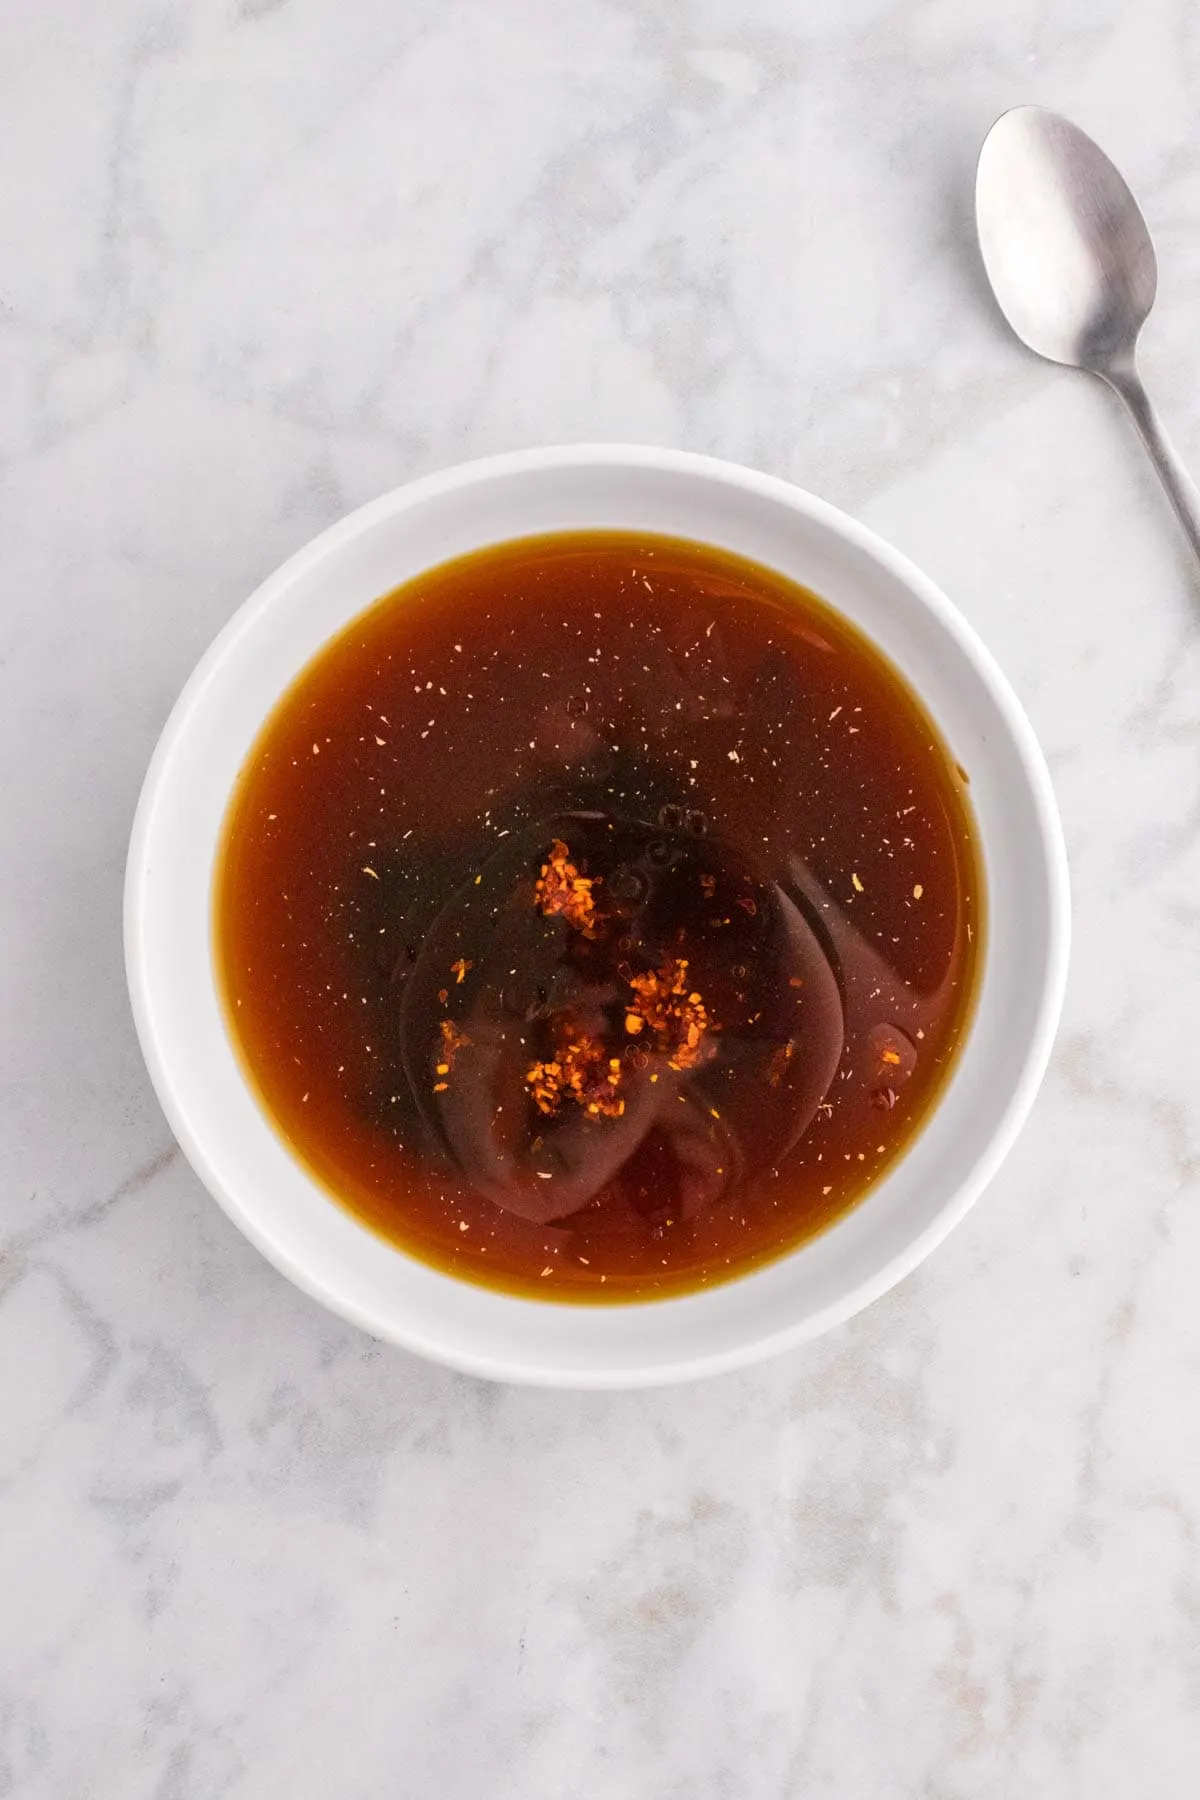 hoisin sauce, soy sauce, oyster sauce, honey, chili garlic sauce and chicken broth in bowl